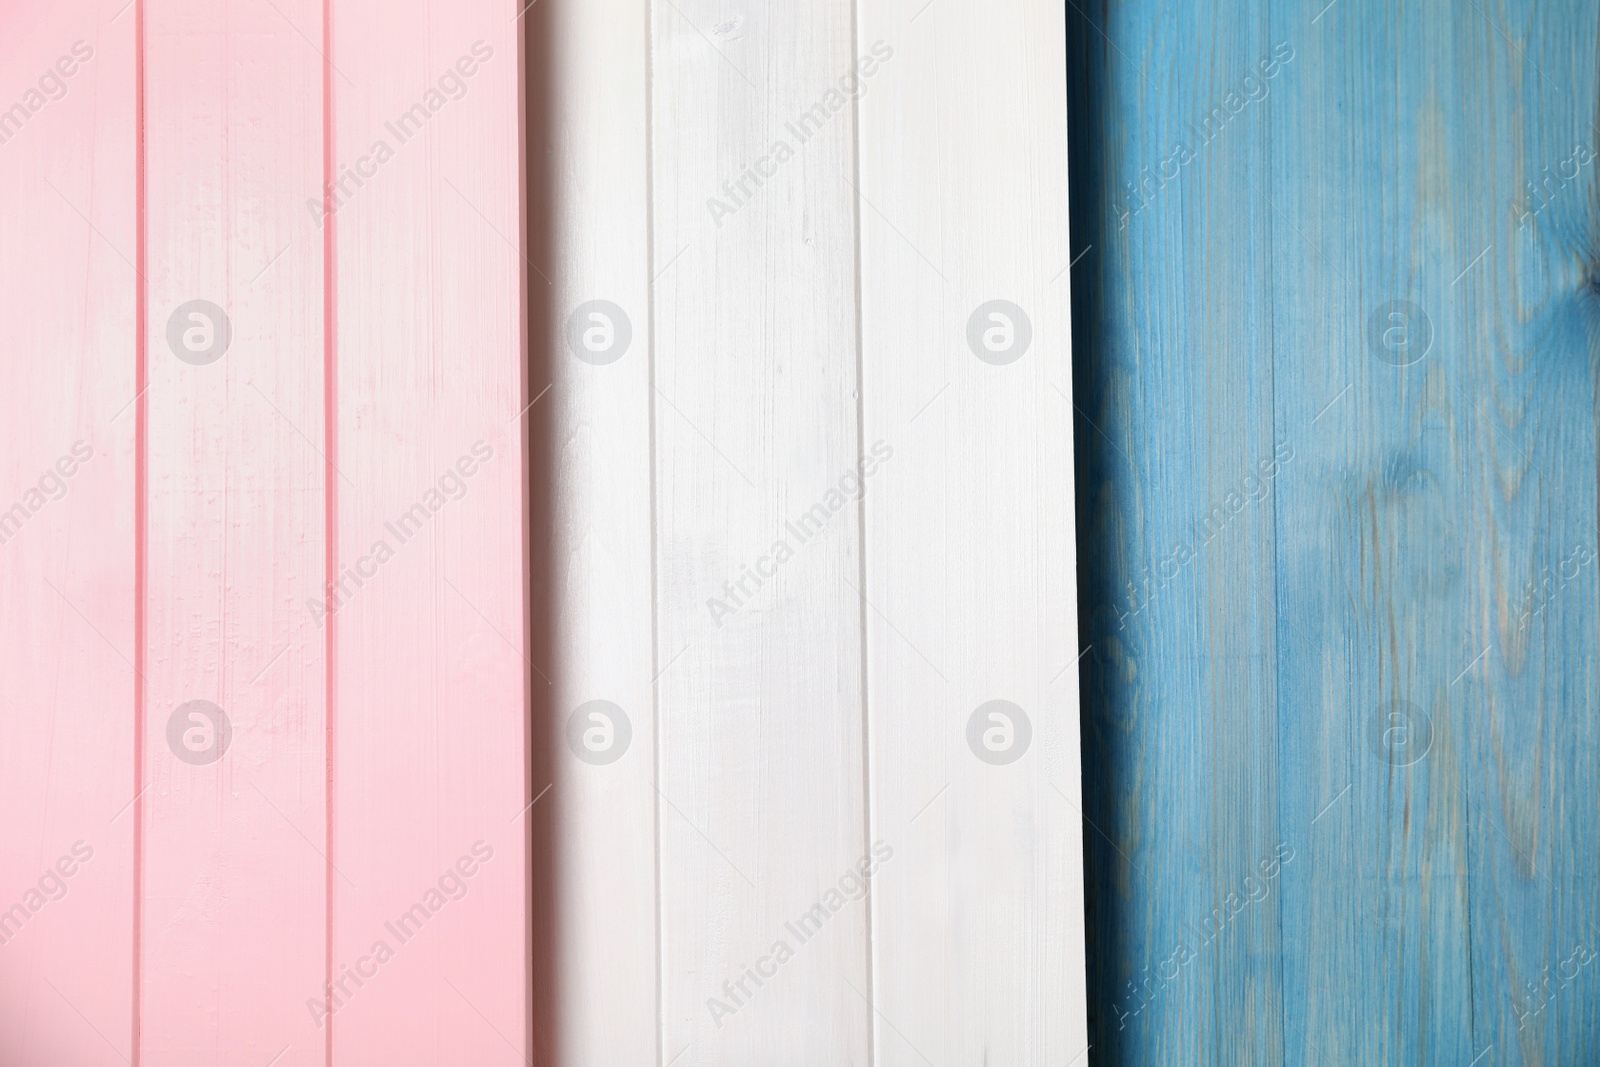 Photo of Different wooden surfaces for photography, flat lay. Stylish photo background